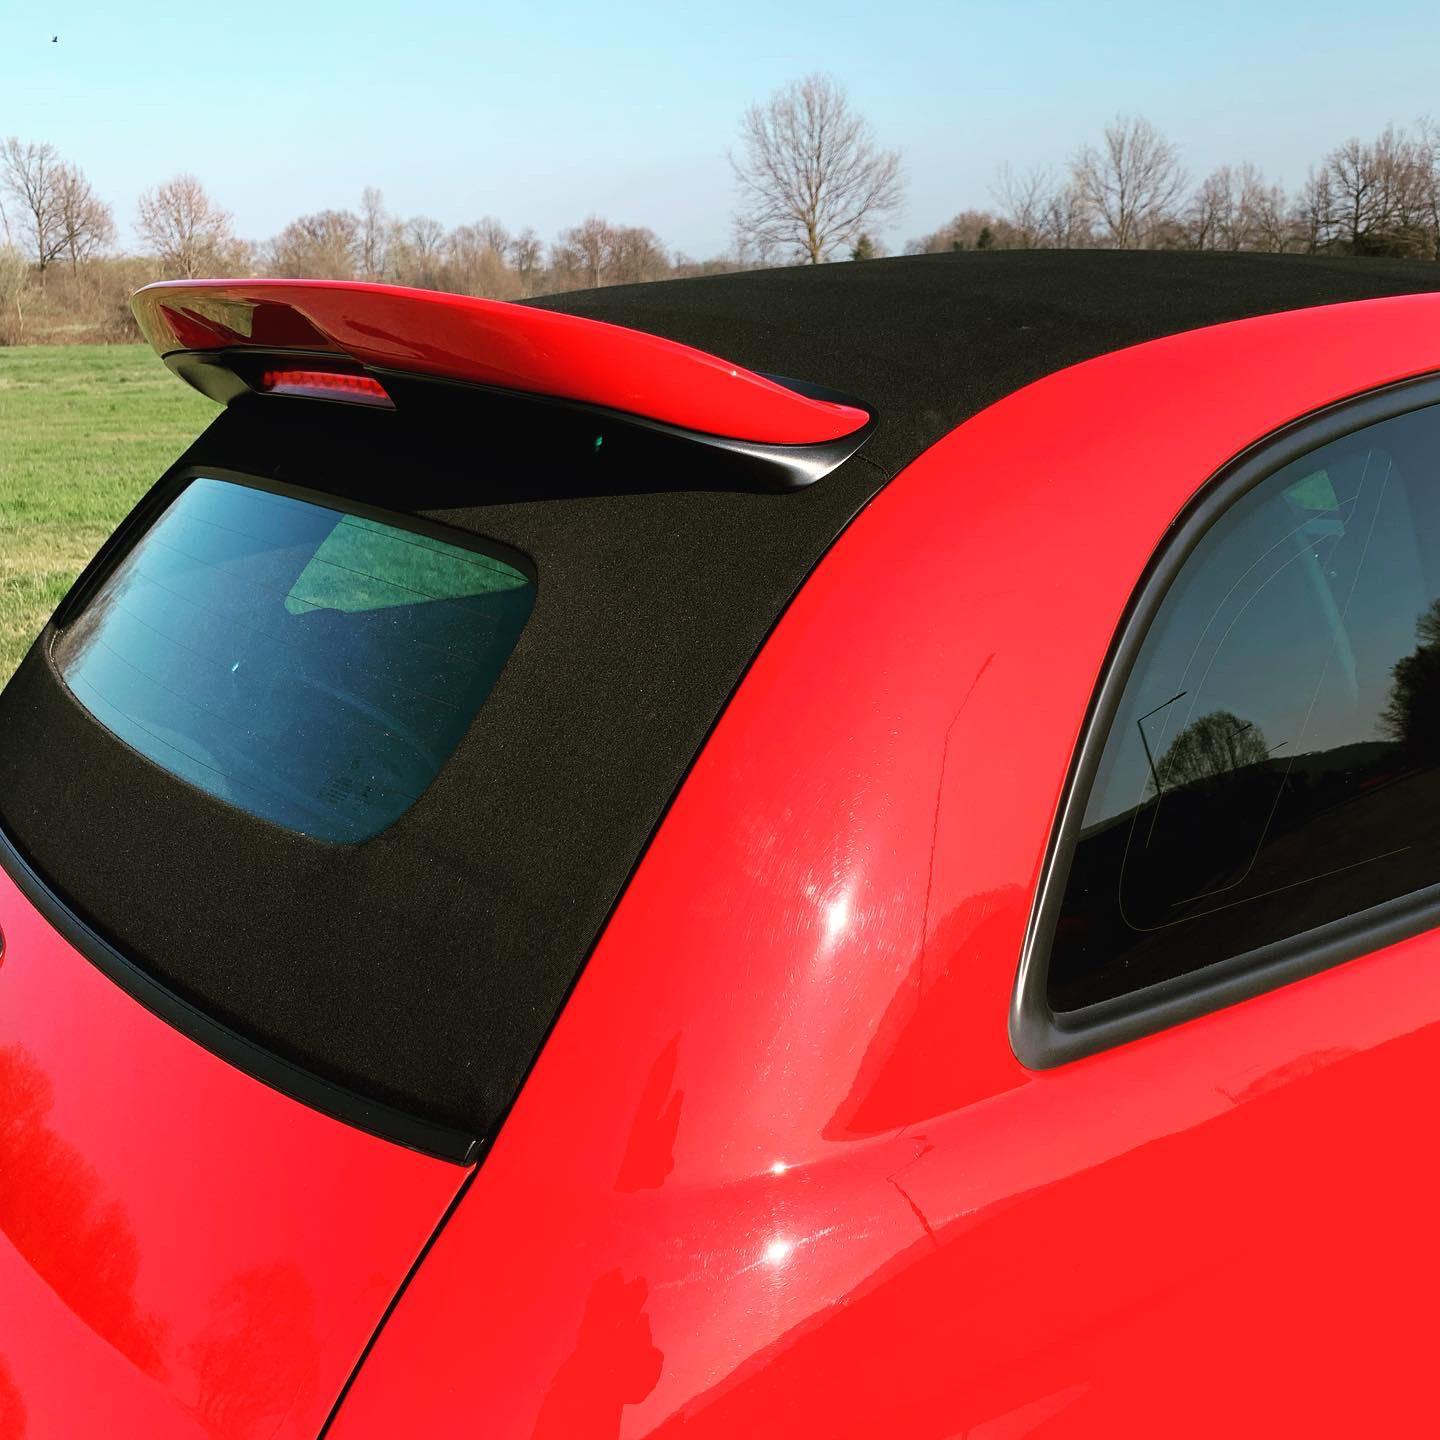 CHD Tuning Rear Spoiler for Abarth 500/595 Cabriolet - Abarth Tuning